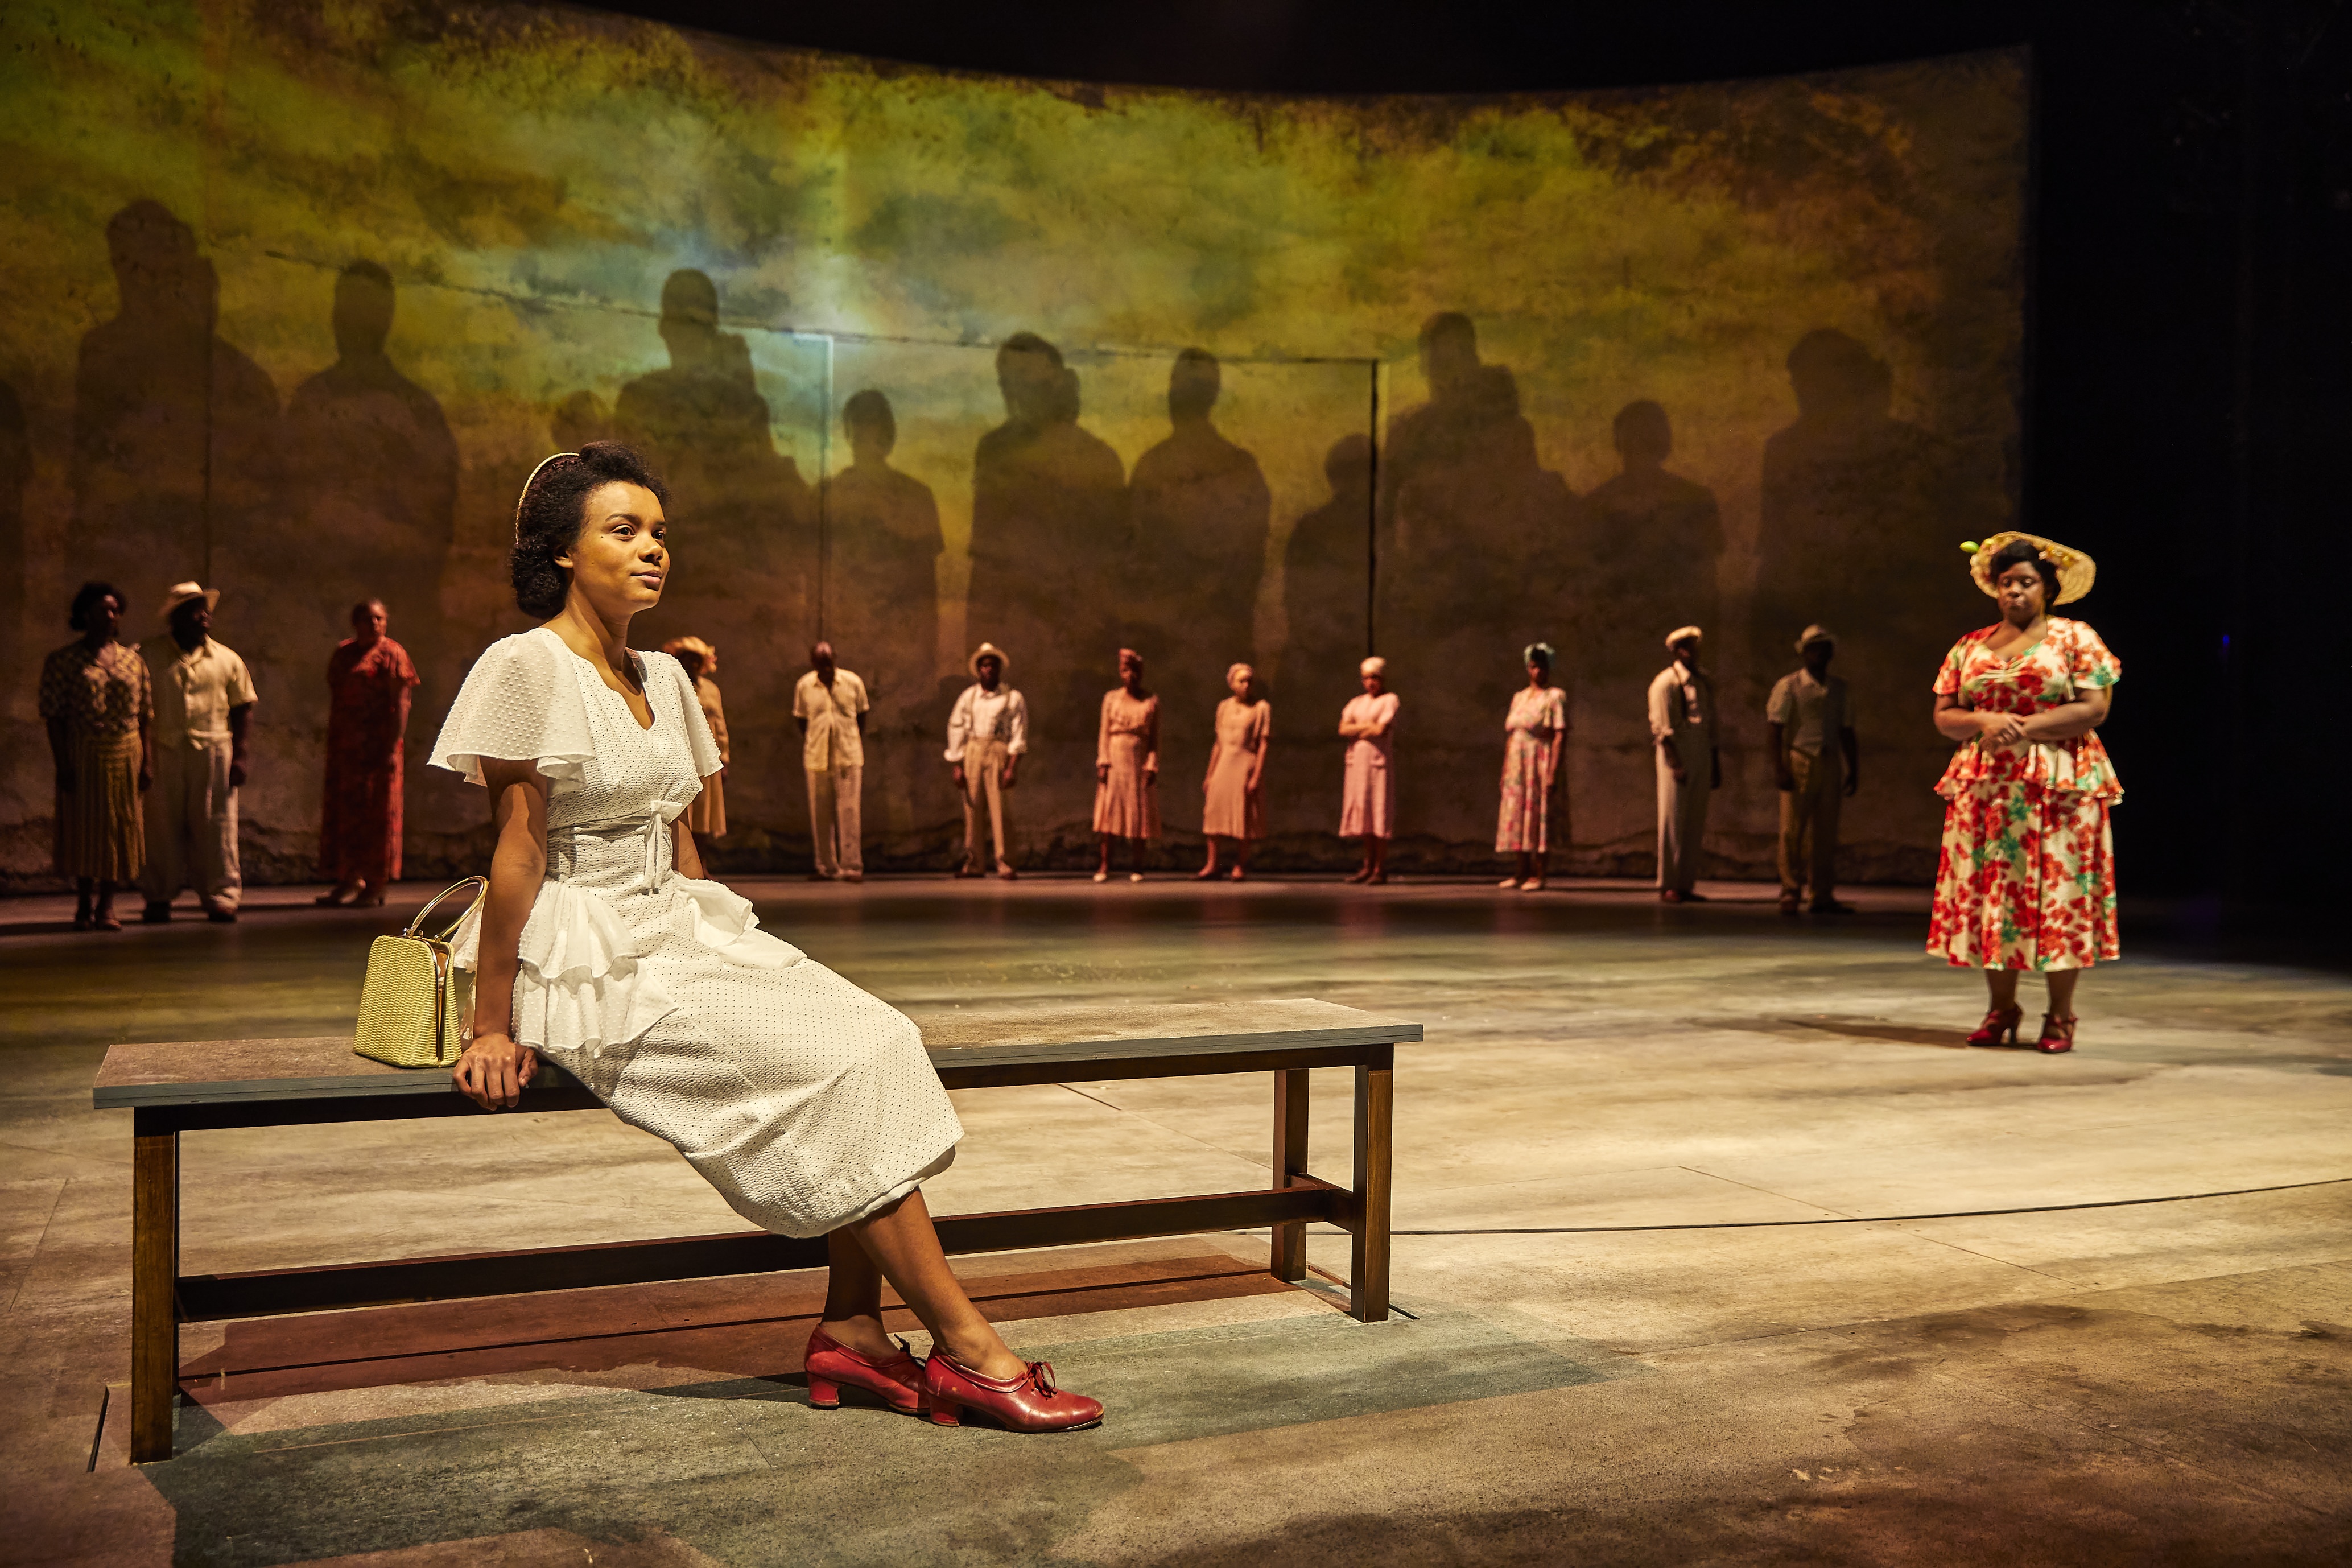 Andrea Levy's Small Island at the National Theatre – Lucy Writers Platform